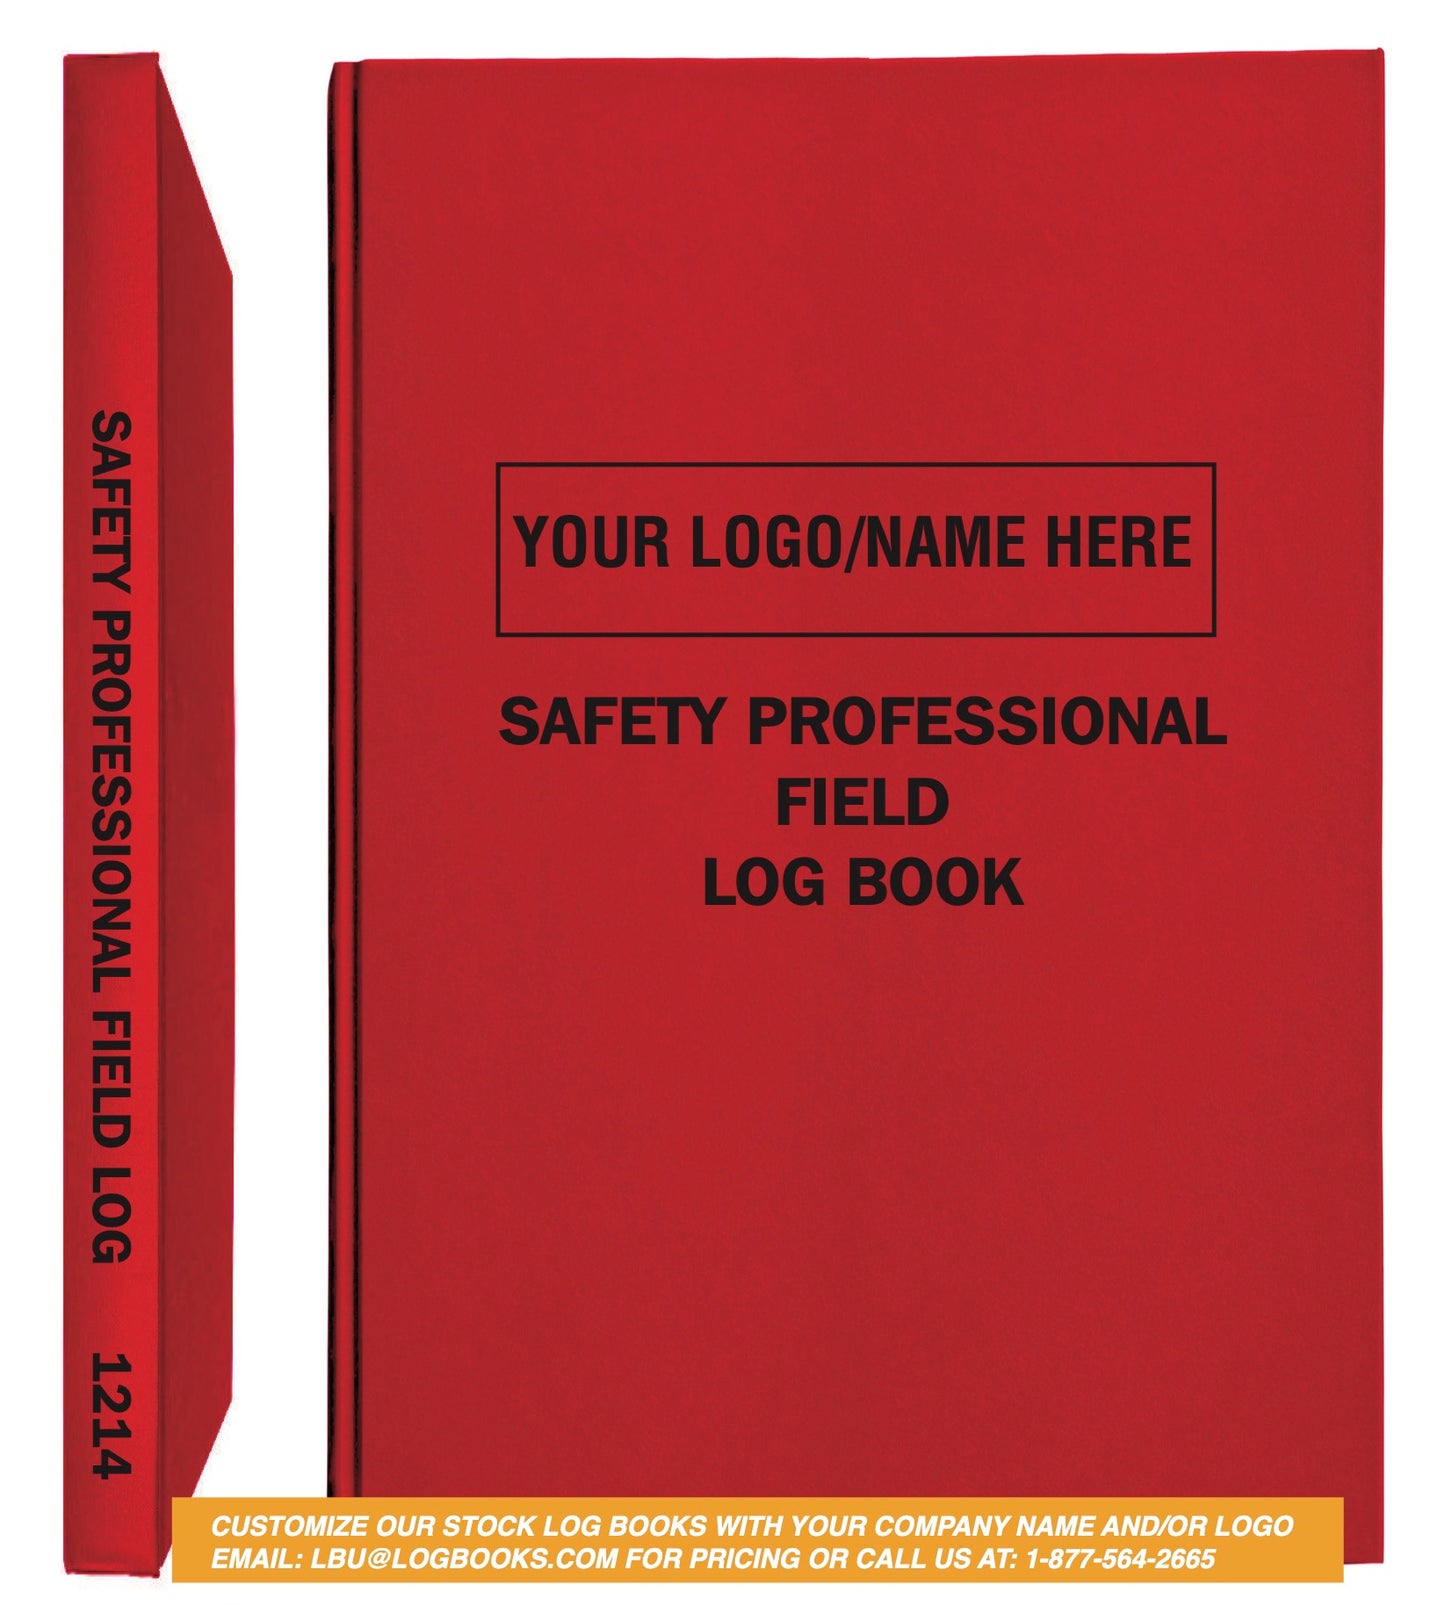 Safety Professional Field Log Book #1214